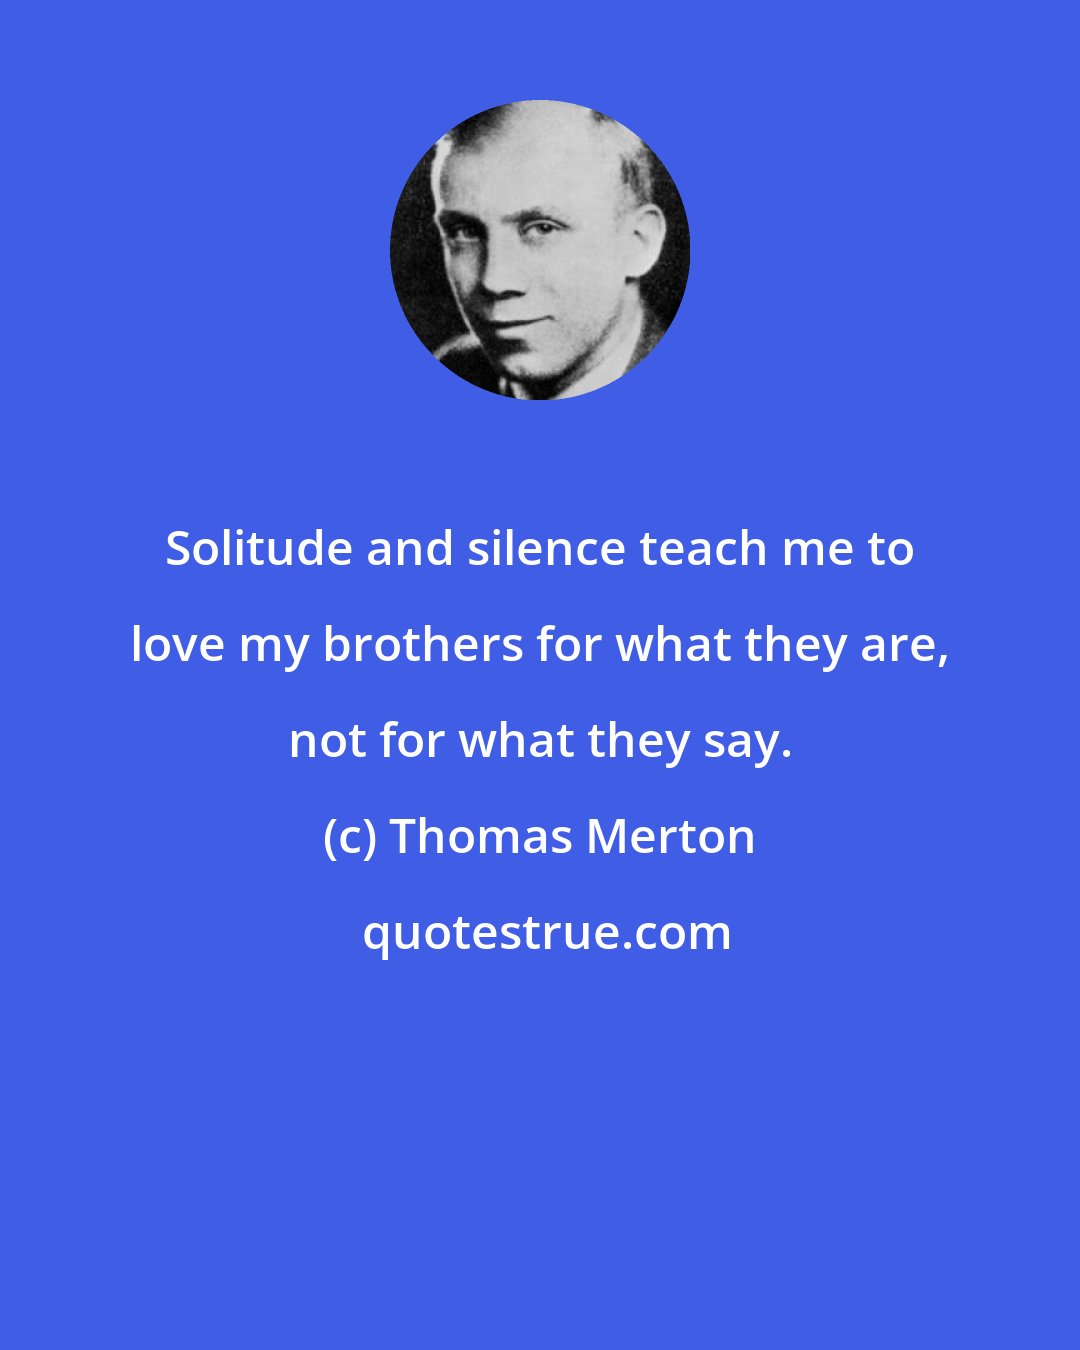 Thomas Merton: Solitude and silence teach me to love my brothers for what they are, not for what they say.